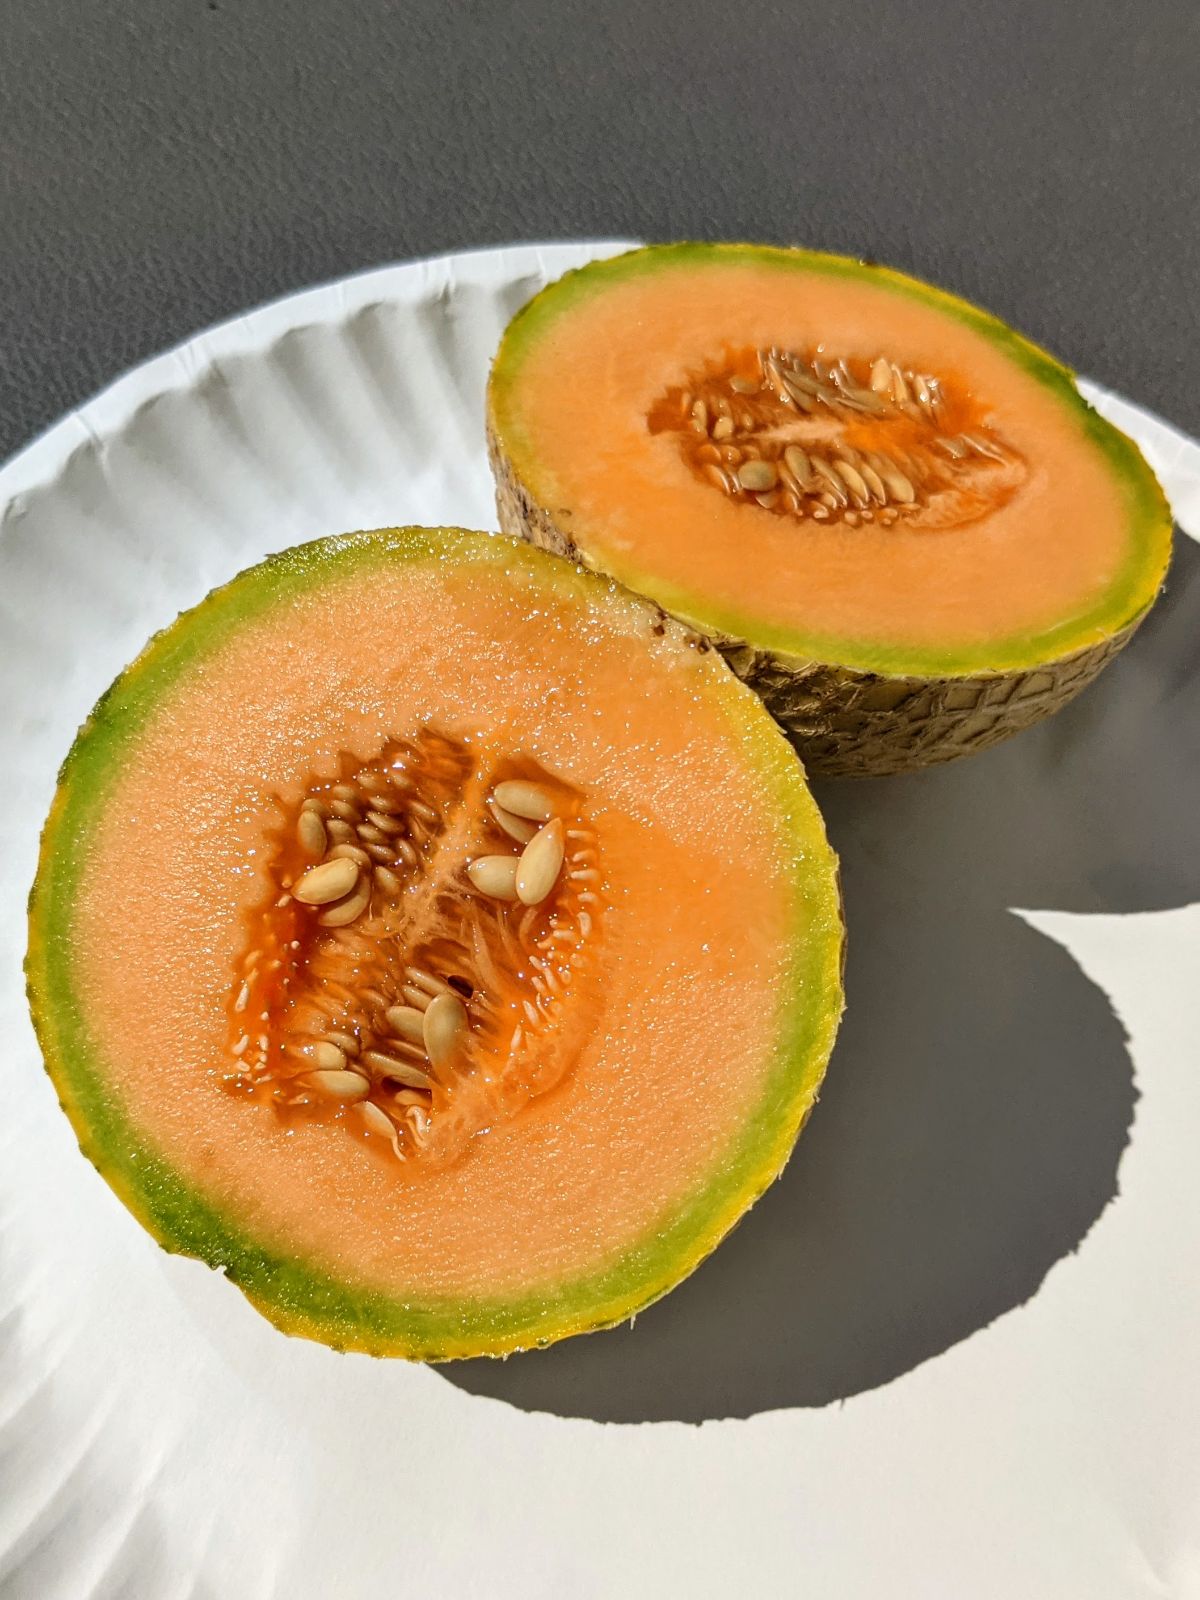 Small homegrown cantaloupe cut in half on a white paper plate